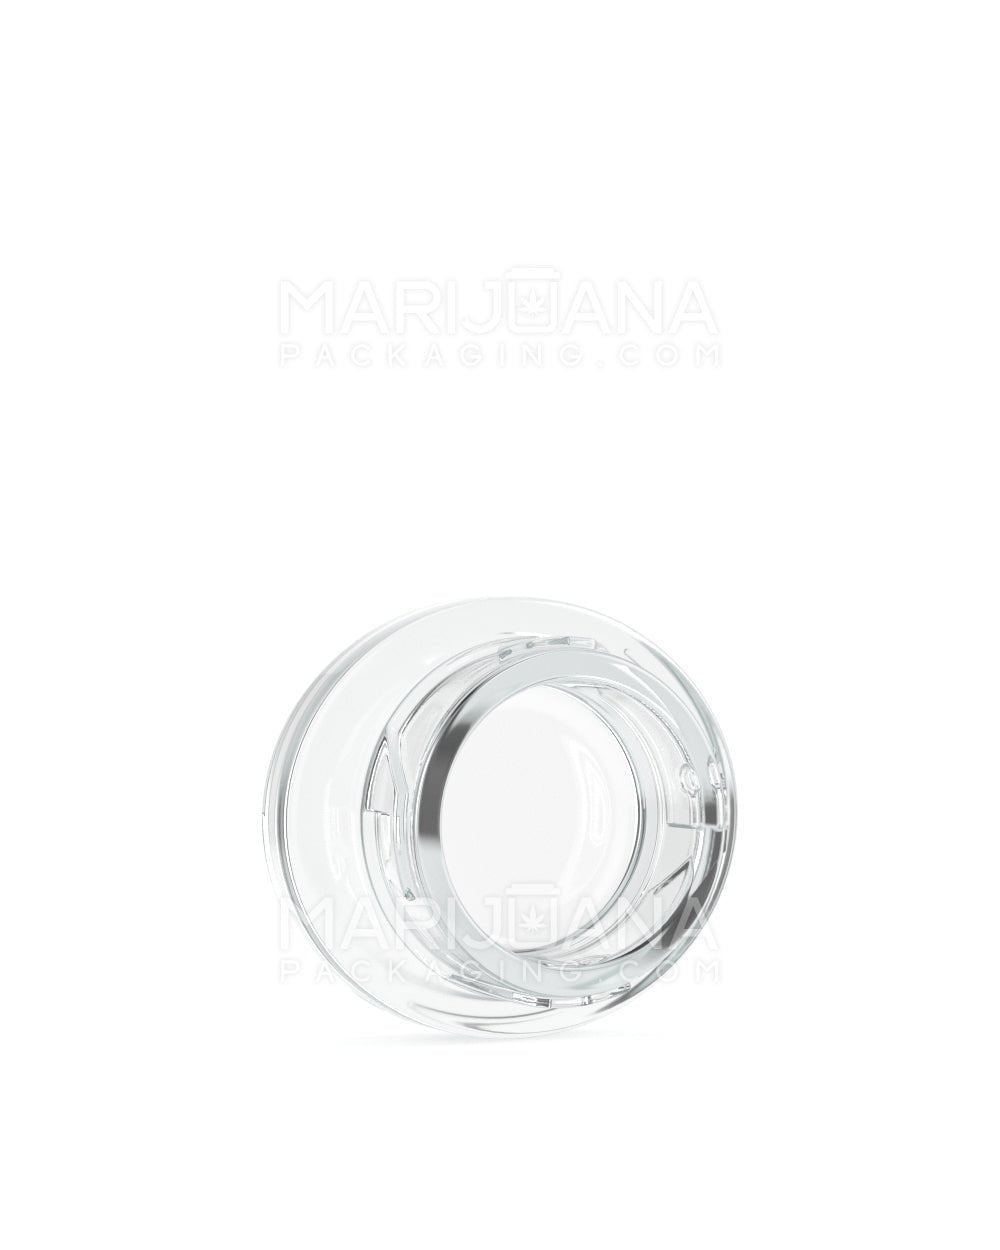 Child Resistant | Clear Glass Oval Concentrate Jar w/ Black Cap | 45mm - 5mL - 240 Count - 2